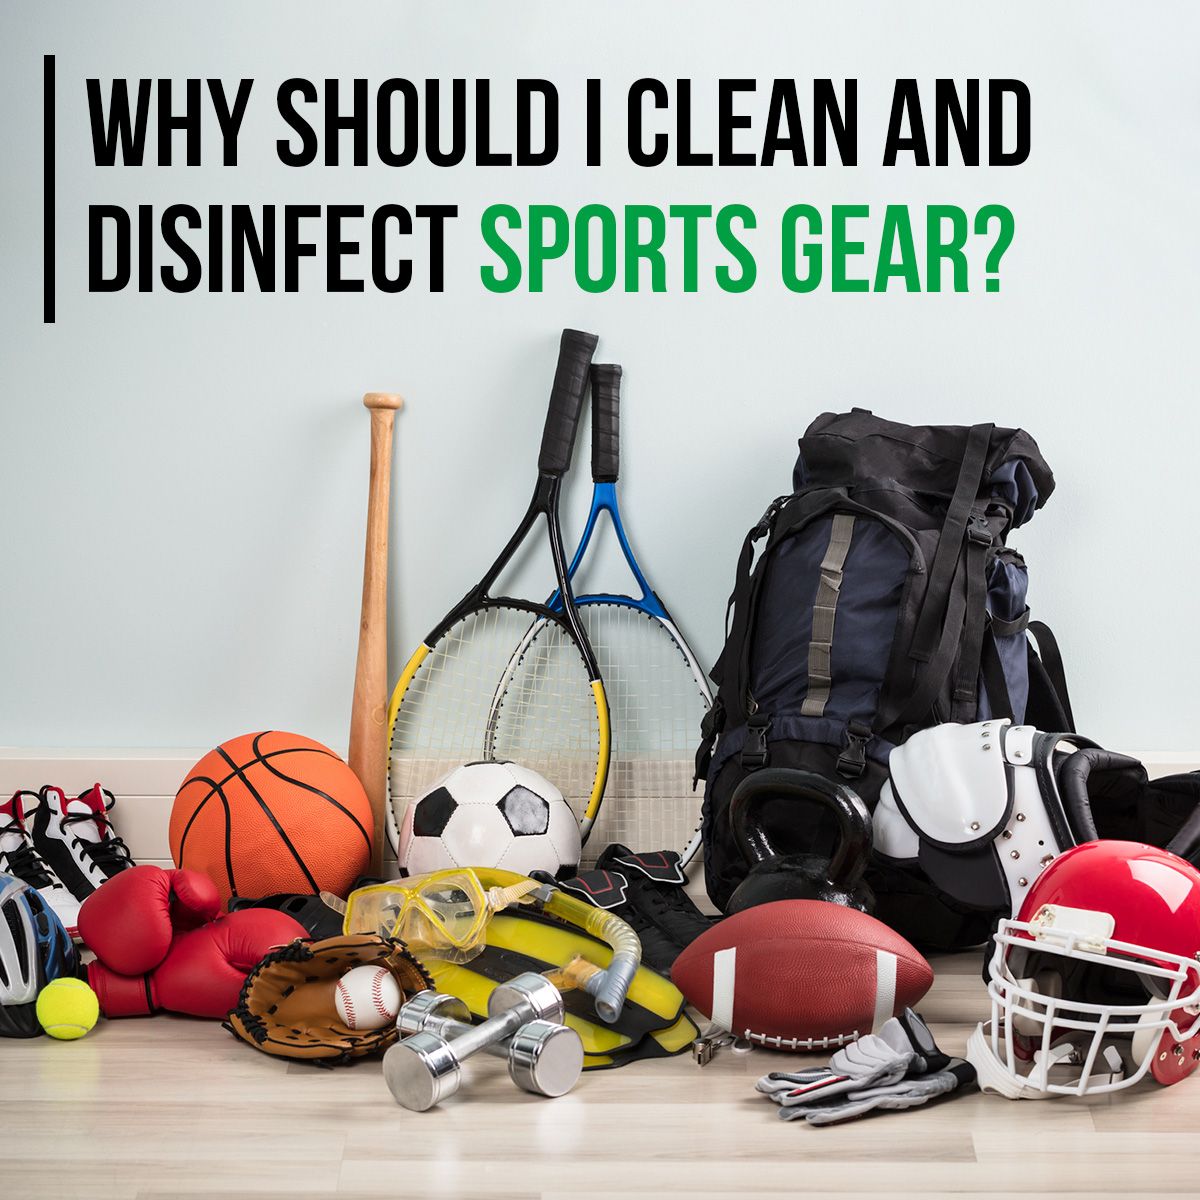 Why Should I Clean and Disinfect Sports Gear?